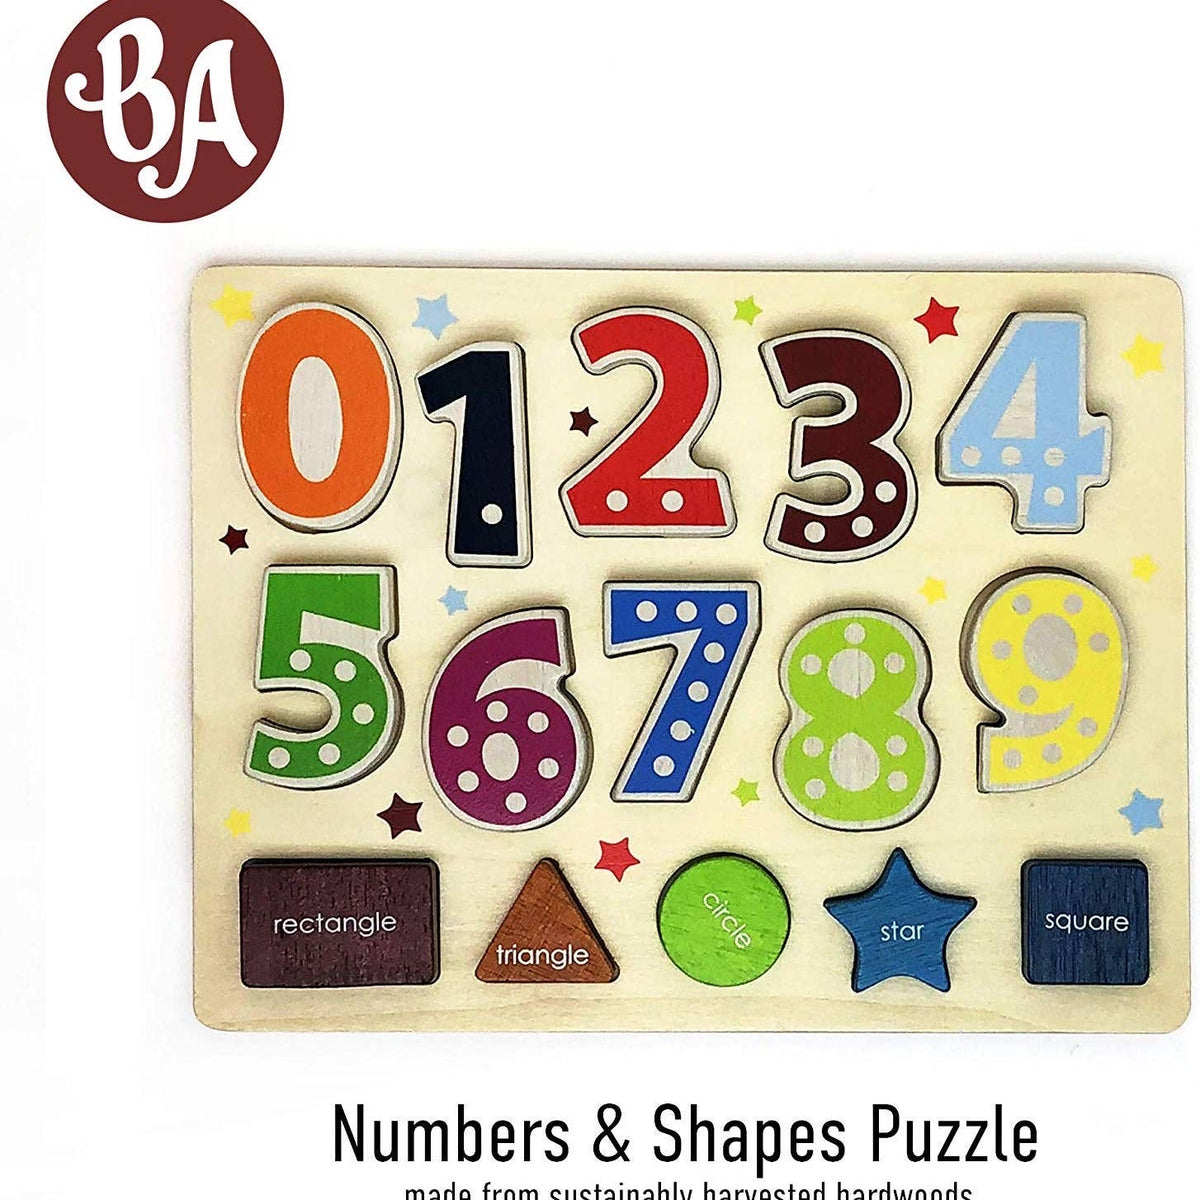 Shape and Number Puzzle